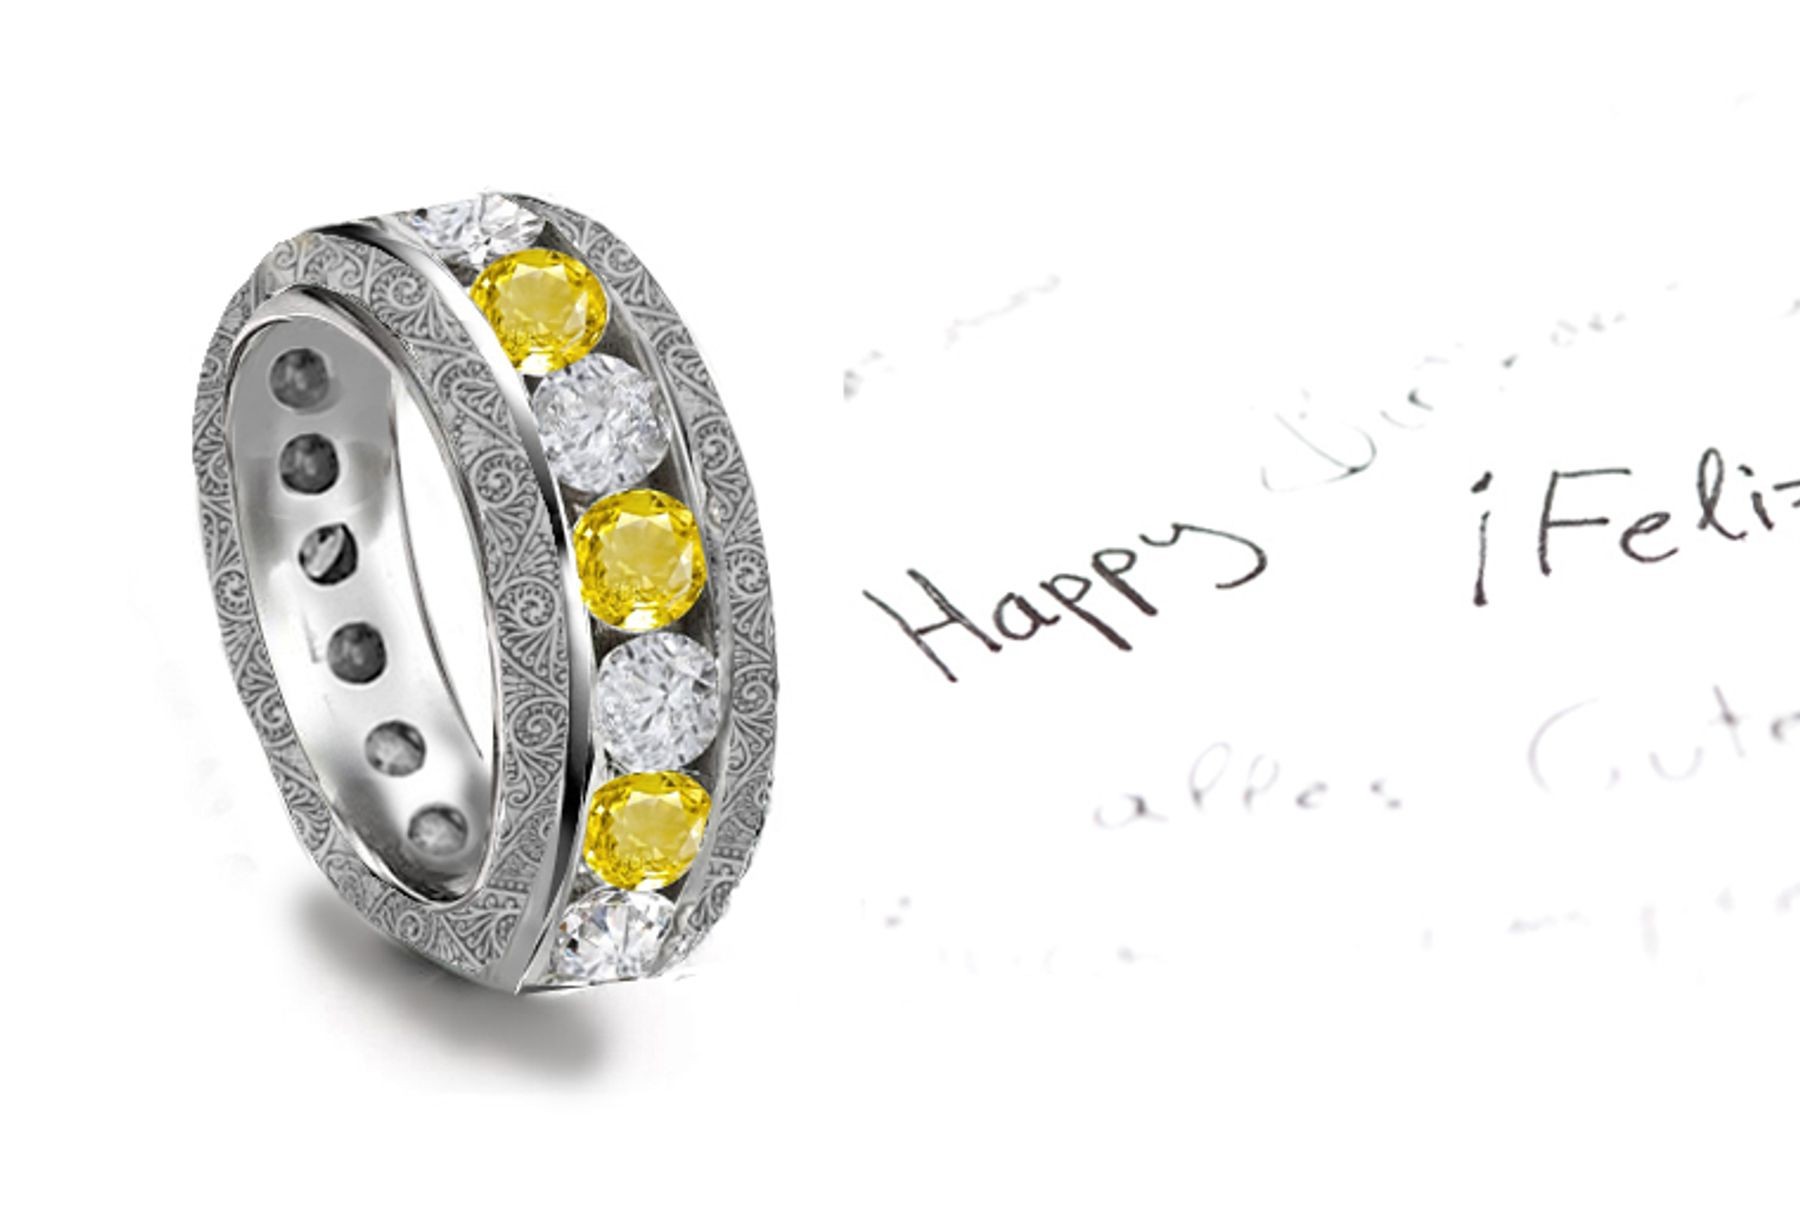 Ticket To Israel: This Diamond Ring with Stronger Hue is Brigher & More Highly Illuminated